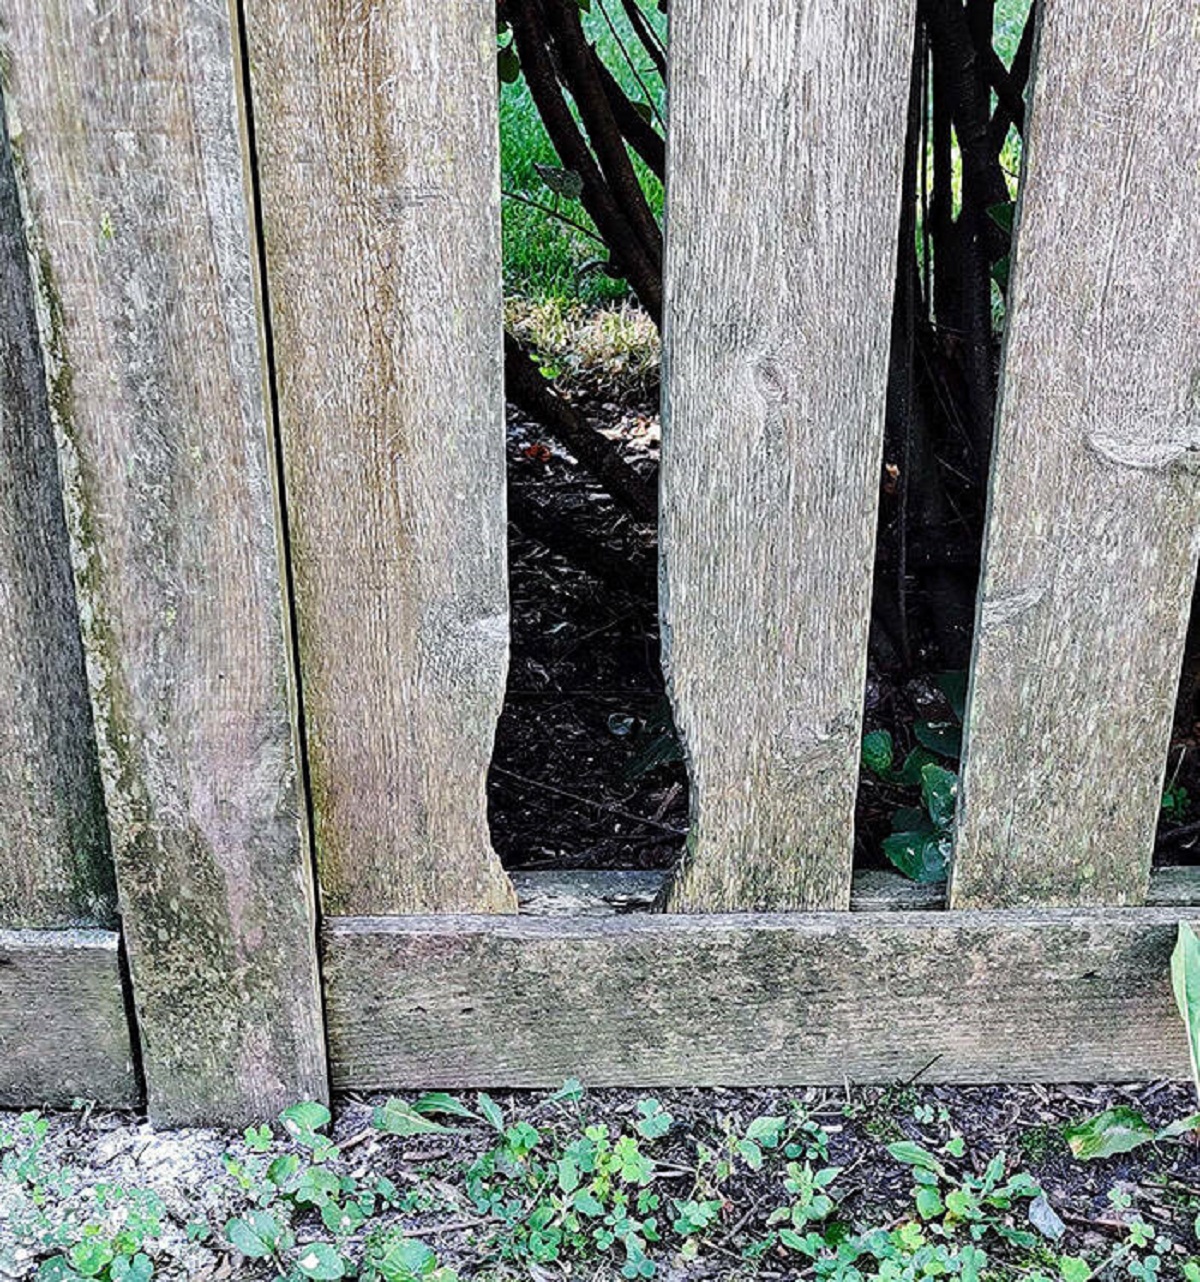 "Generations Of Bunnies Have Worn A Perfect Groove In My Neighbor's Fence"